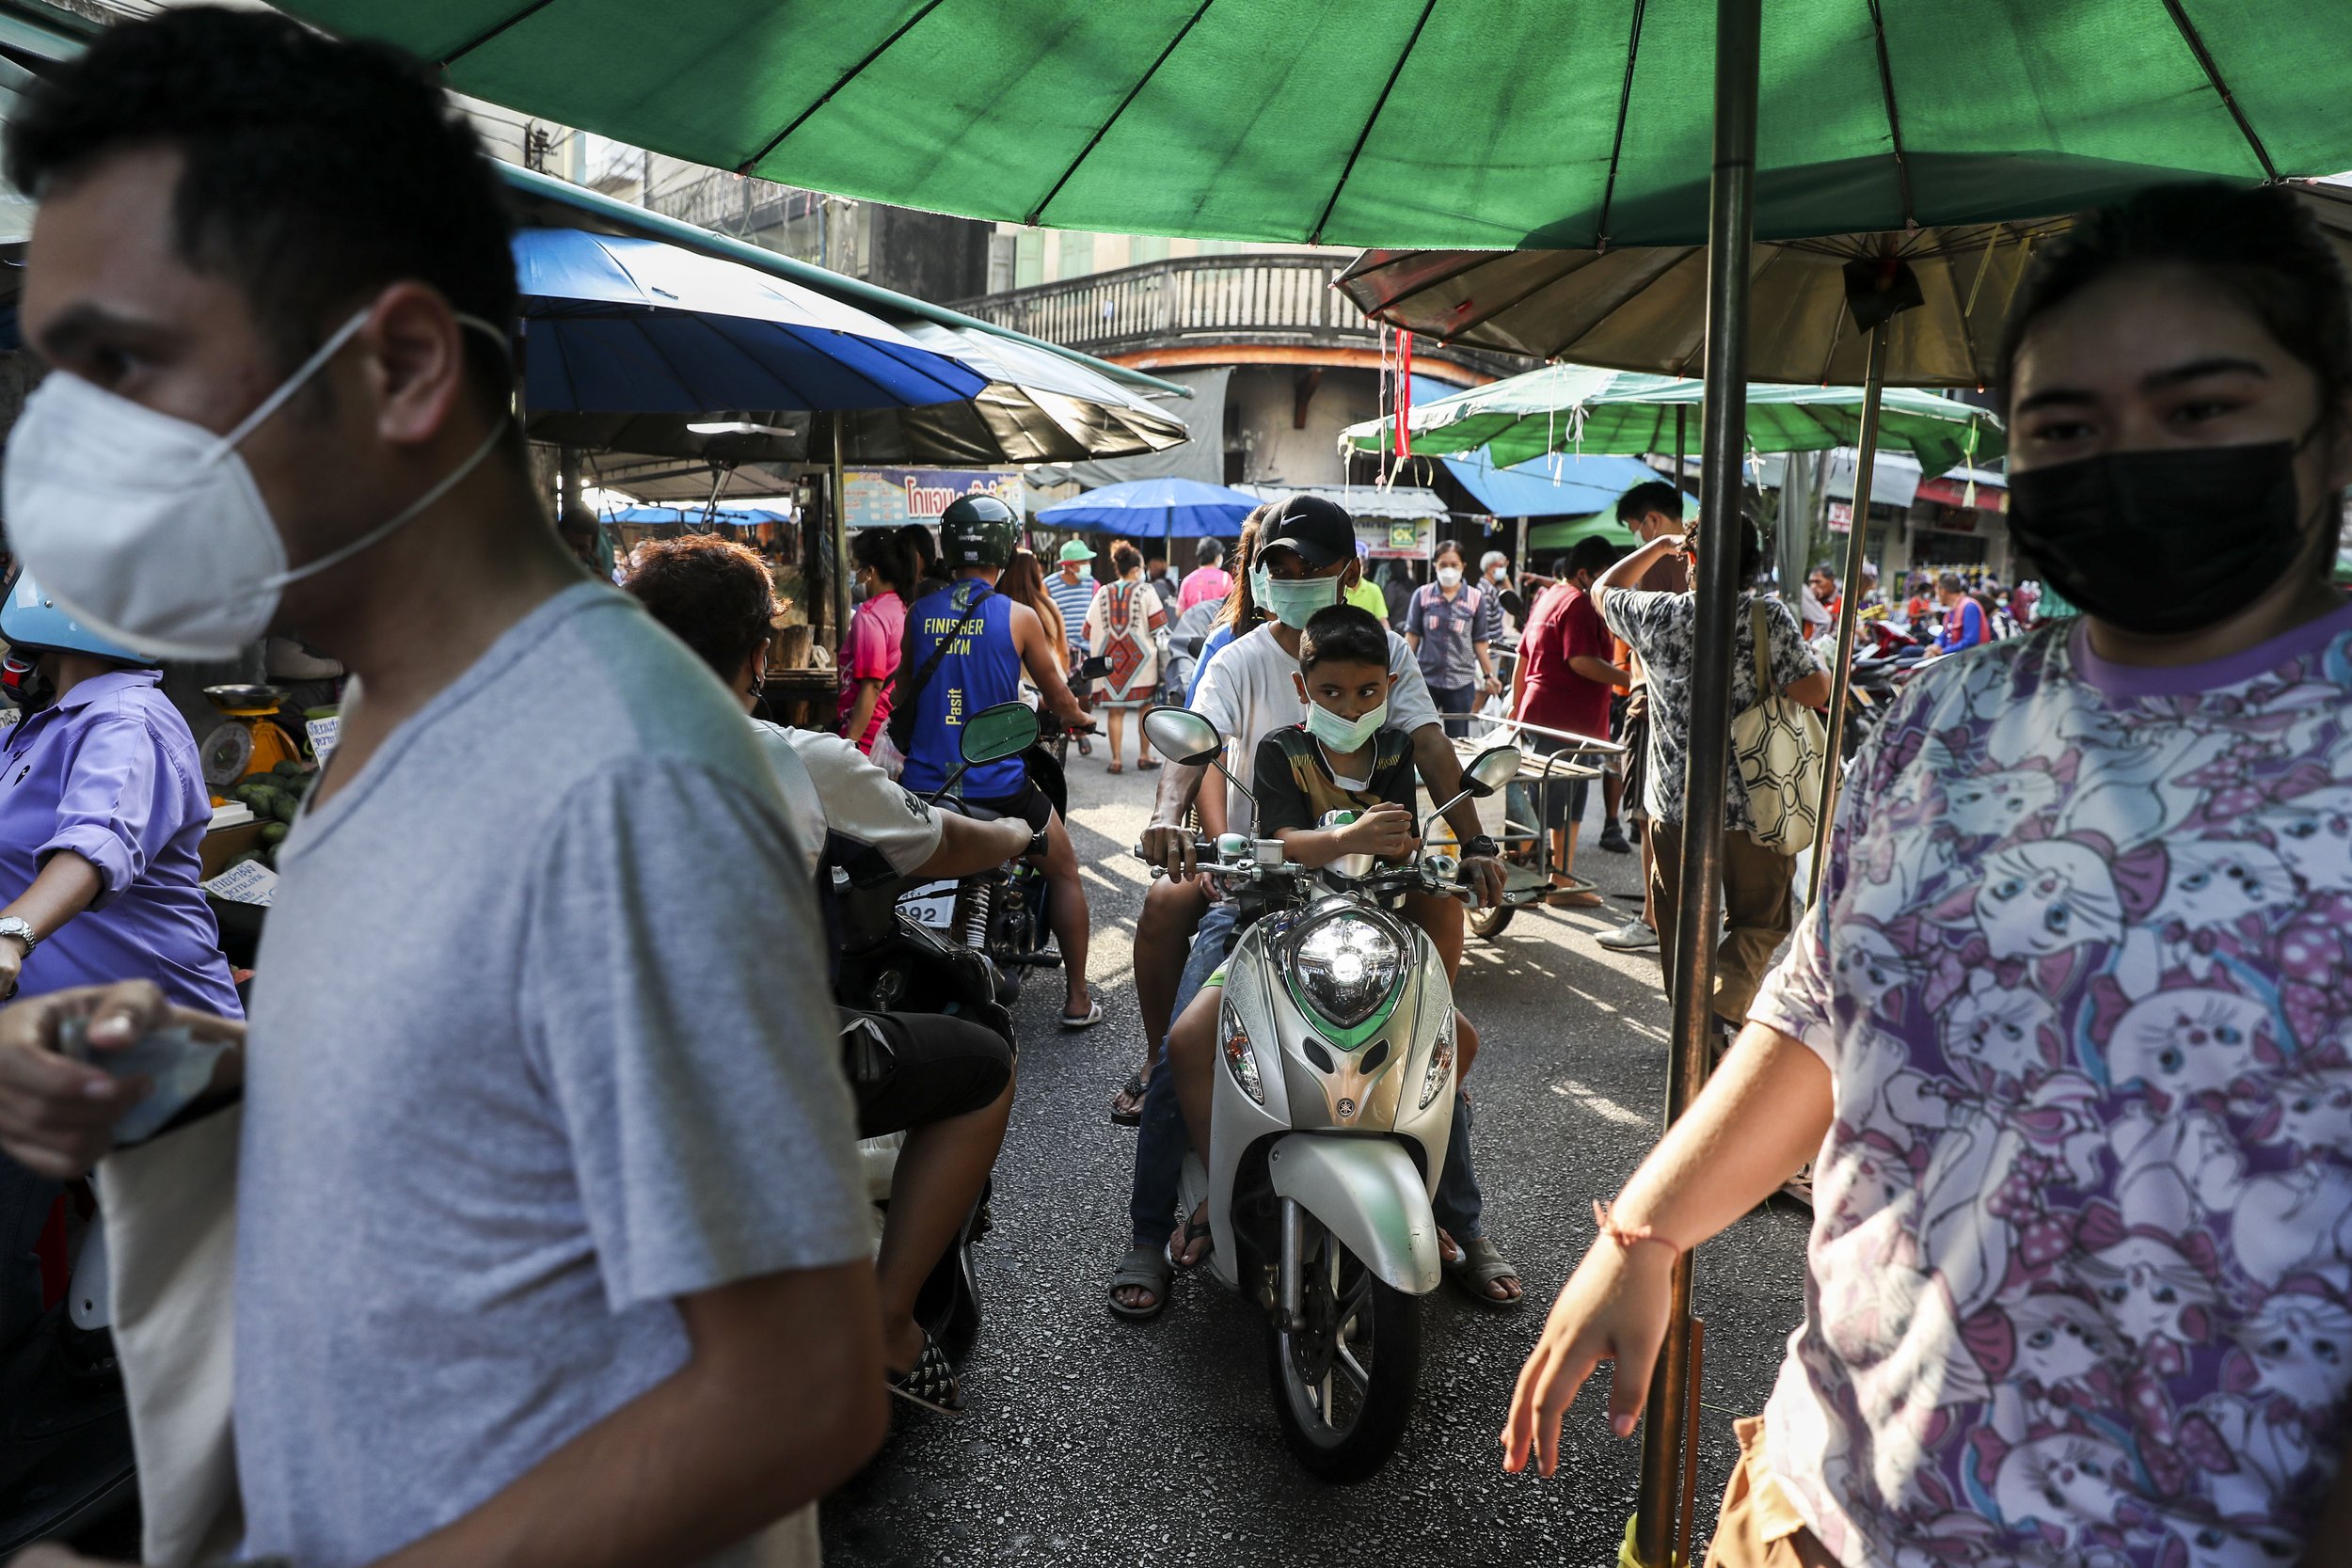  People navigate the crowded market on a motorbike in Trang, Thailand on Saturday, April 16, 2022. Shoppers will often pass through markets on motorbike, stopping at stalls to make their purchases.  